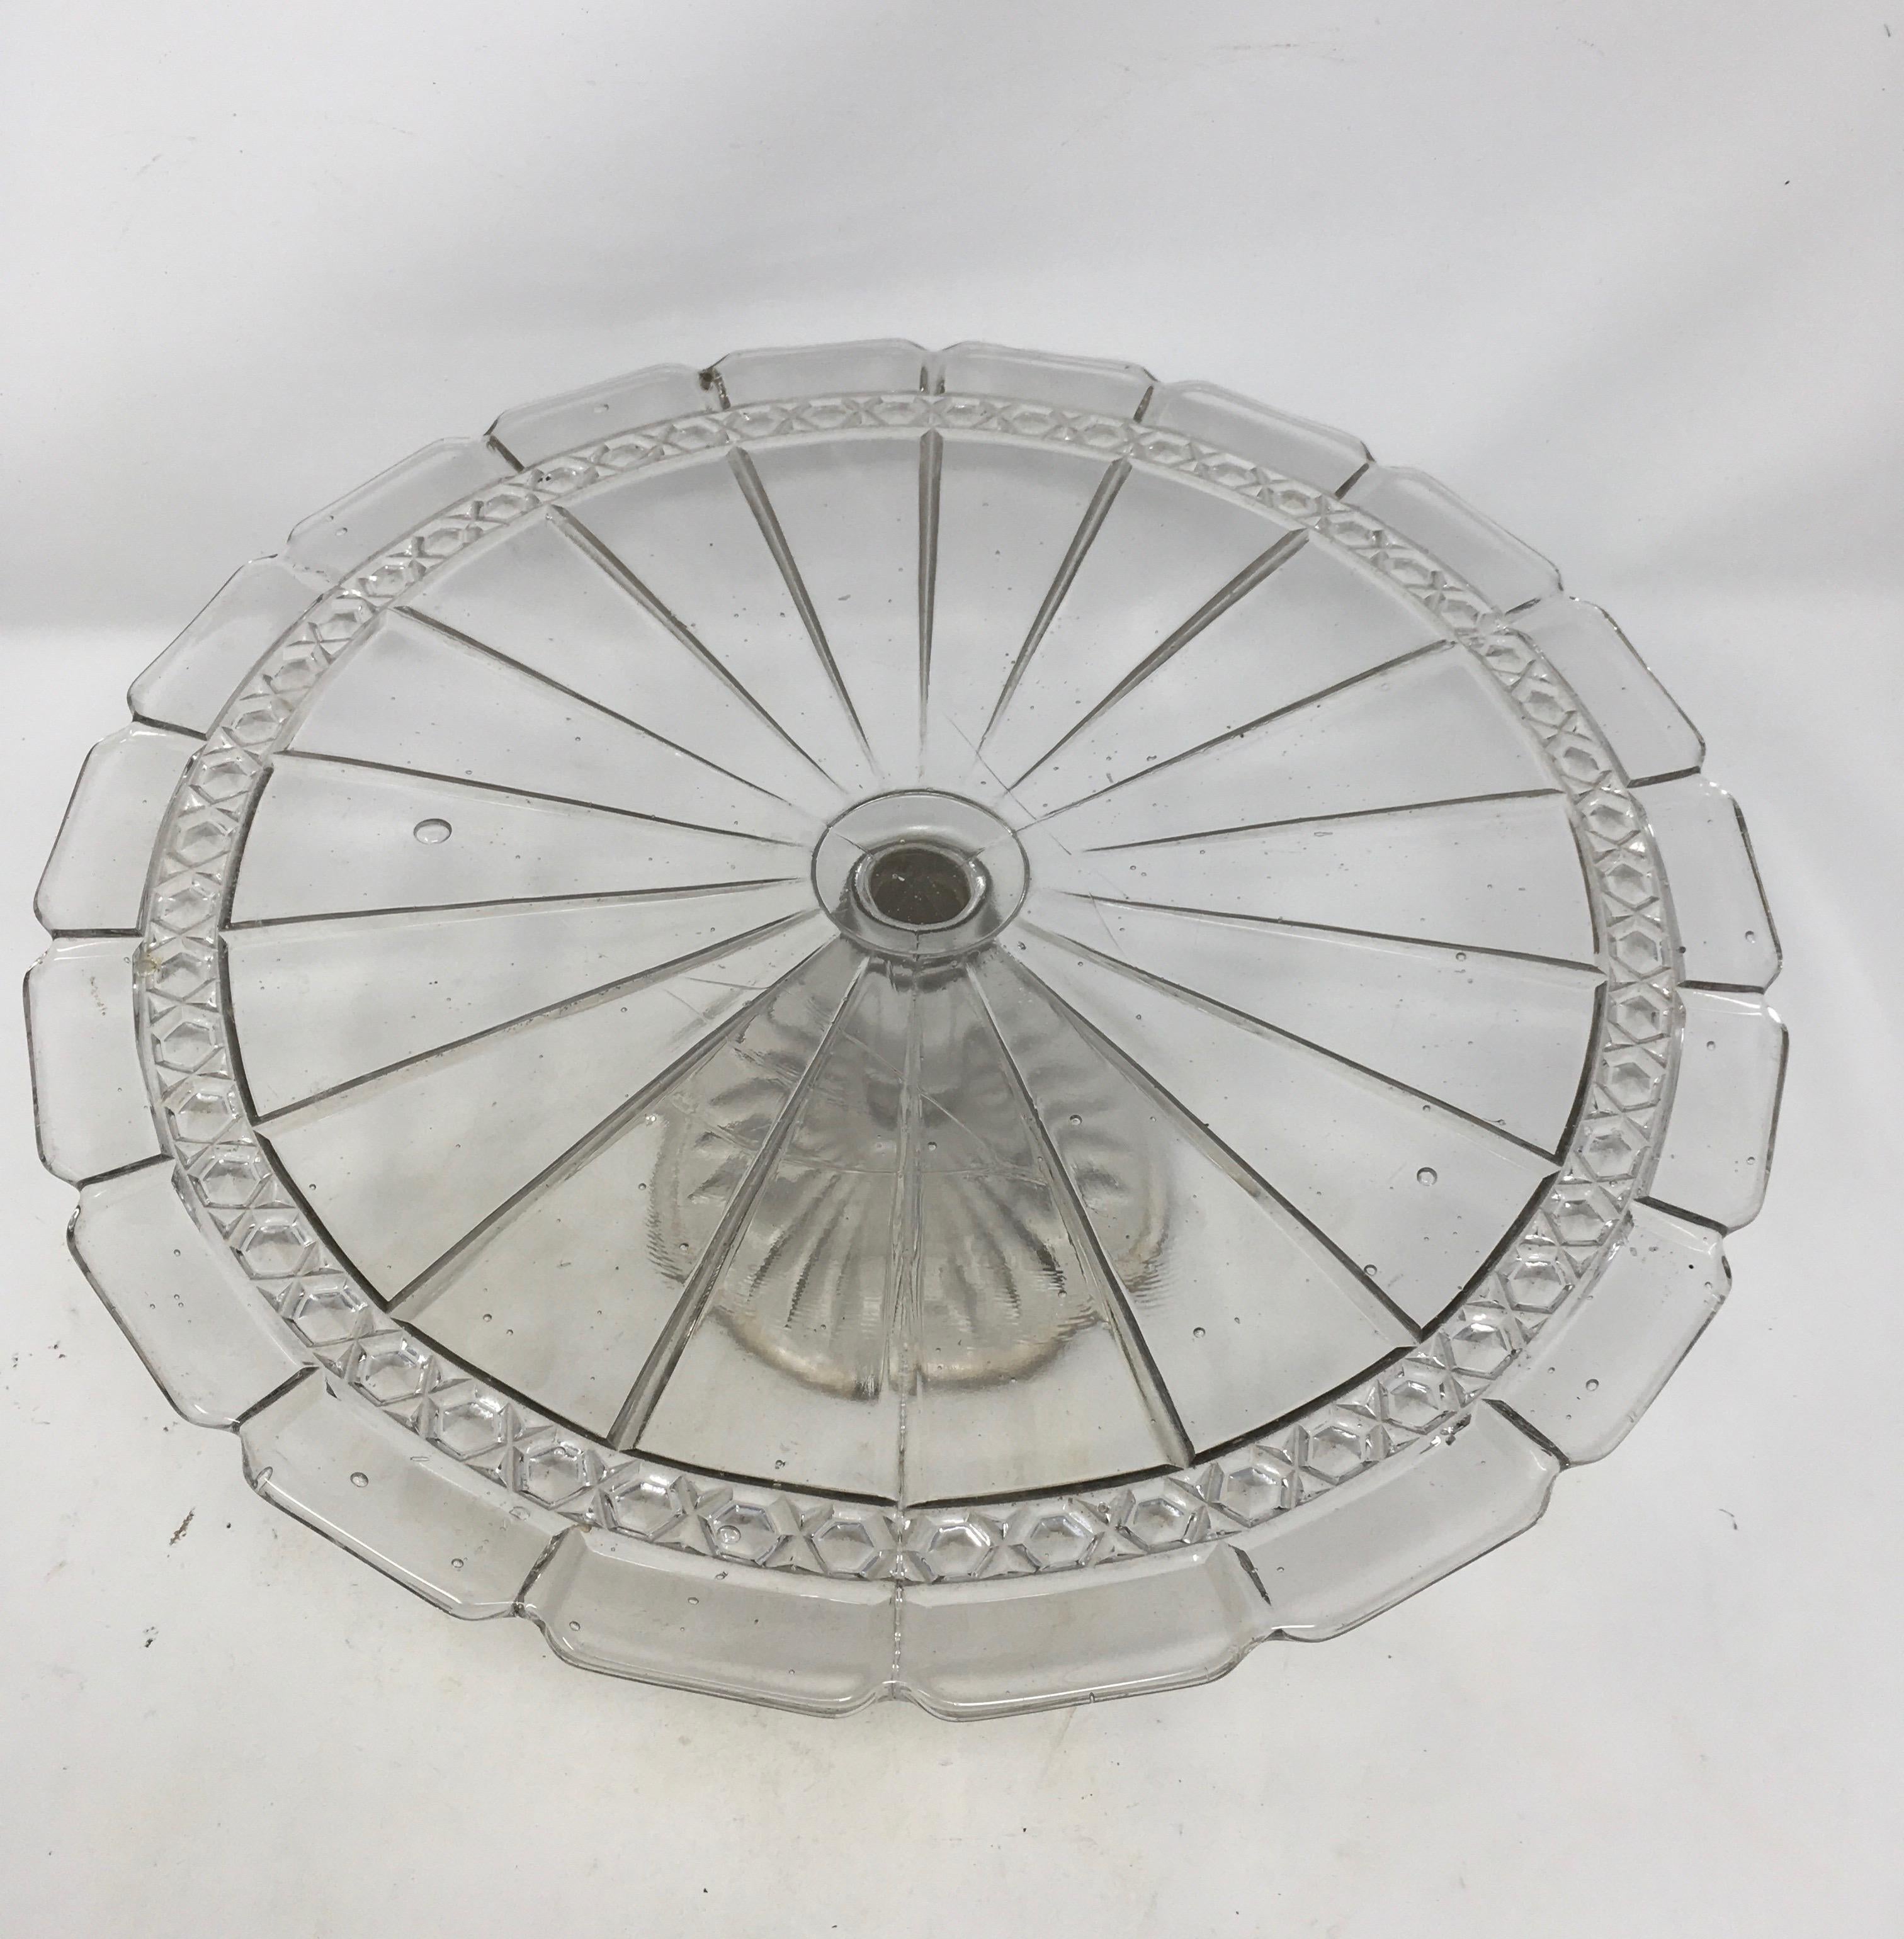 This antique cut-glass cake patisserie stand sits on a cut glass pedestal base. Perfect for displaying your culinary confections, this piece’s simple, elegant look will mix with any decor.

This piece weighs 5 lbs.